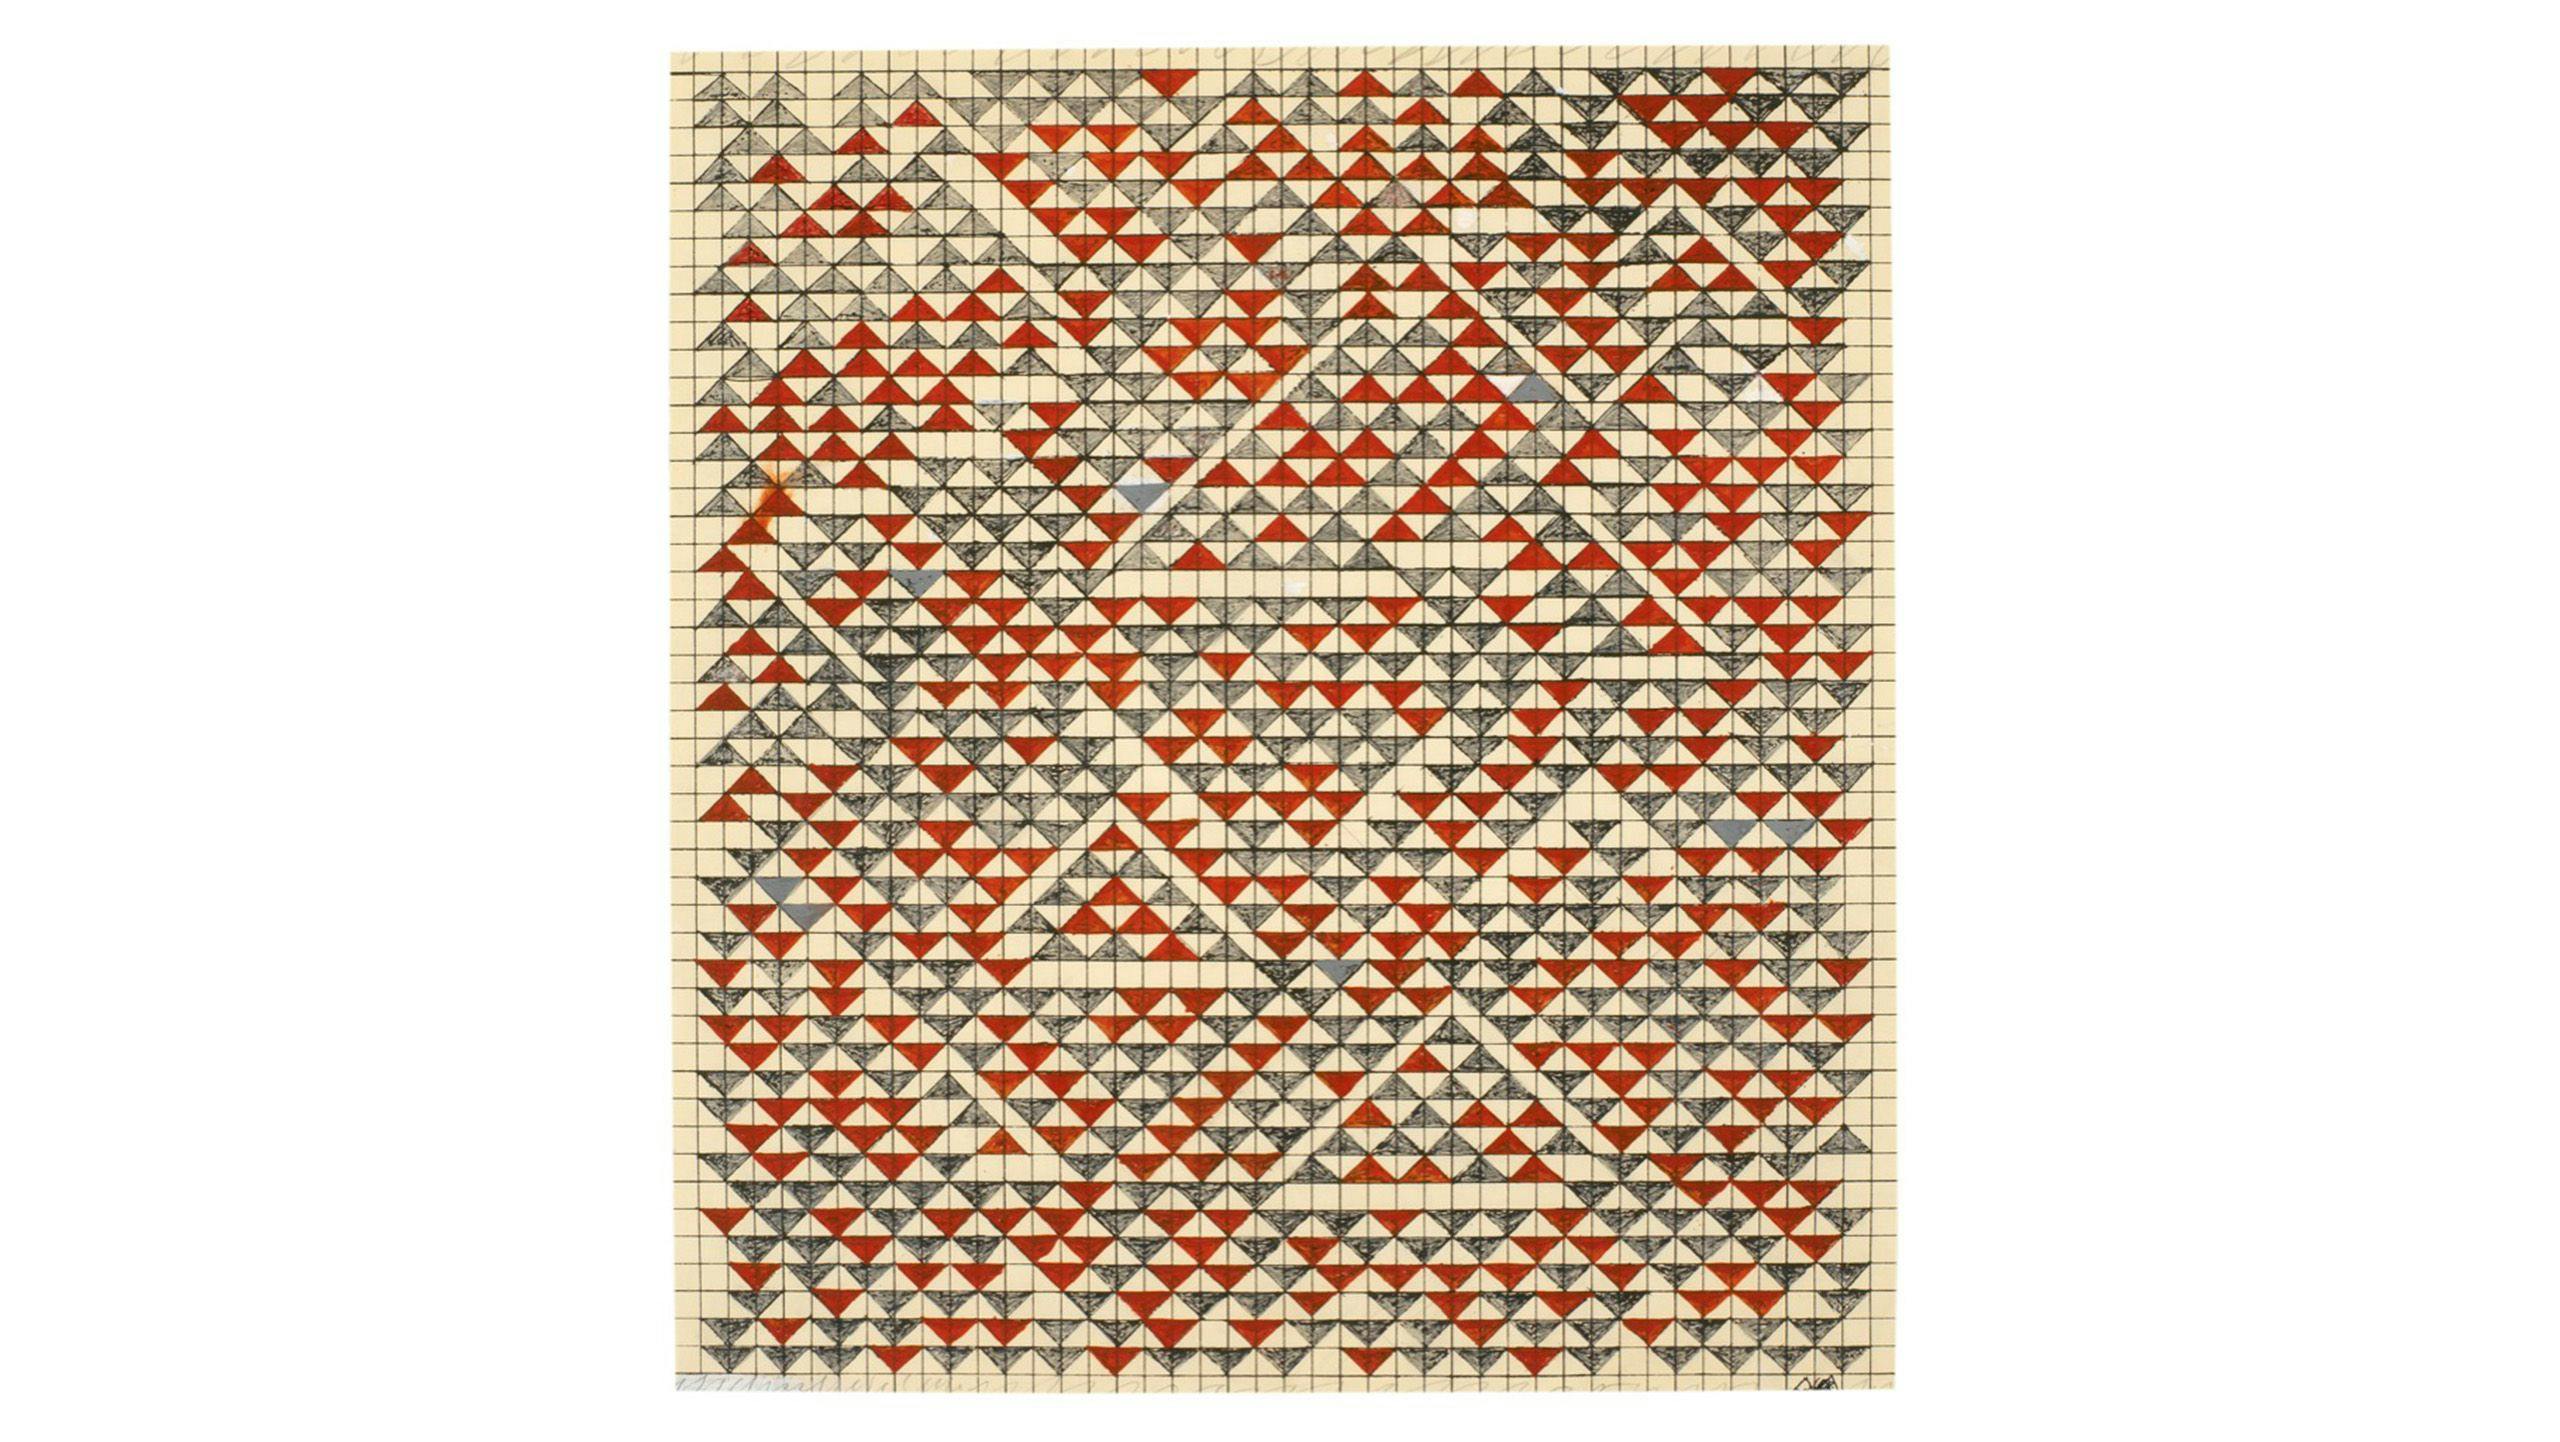 A work by Anni Albers, titled Study for Camino Real, dated 1967